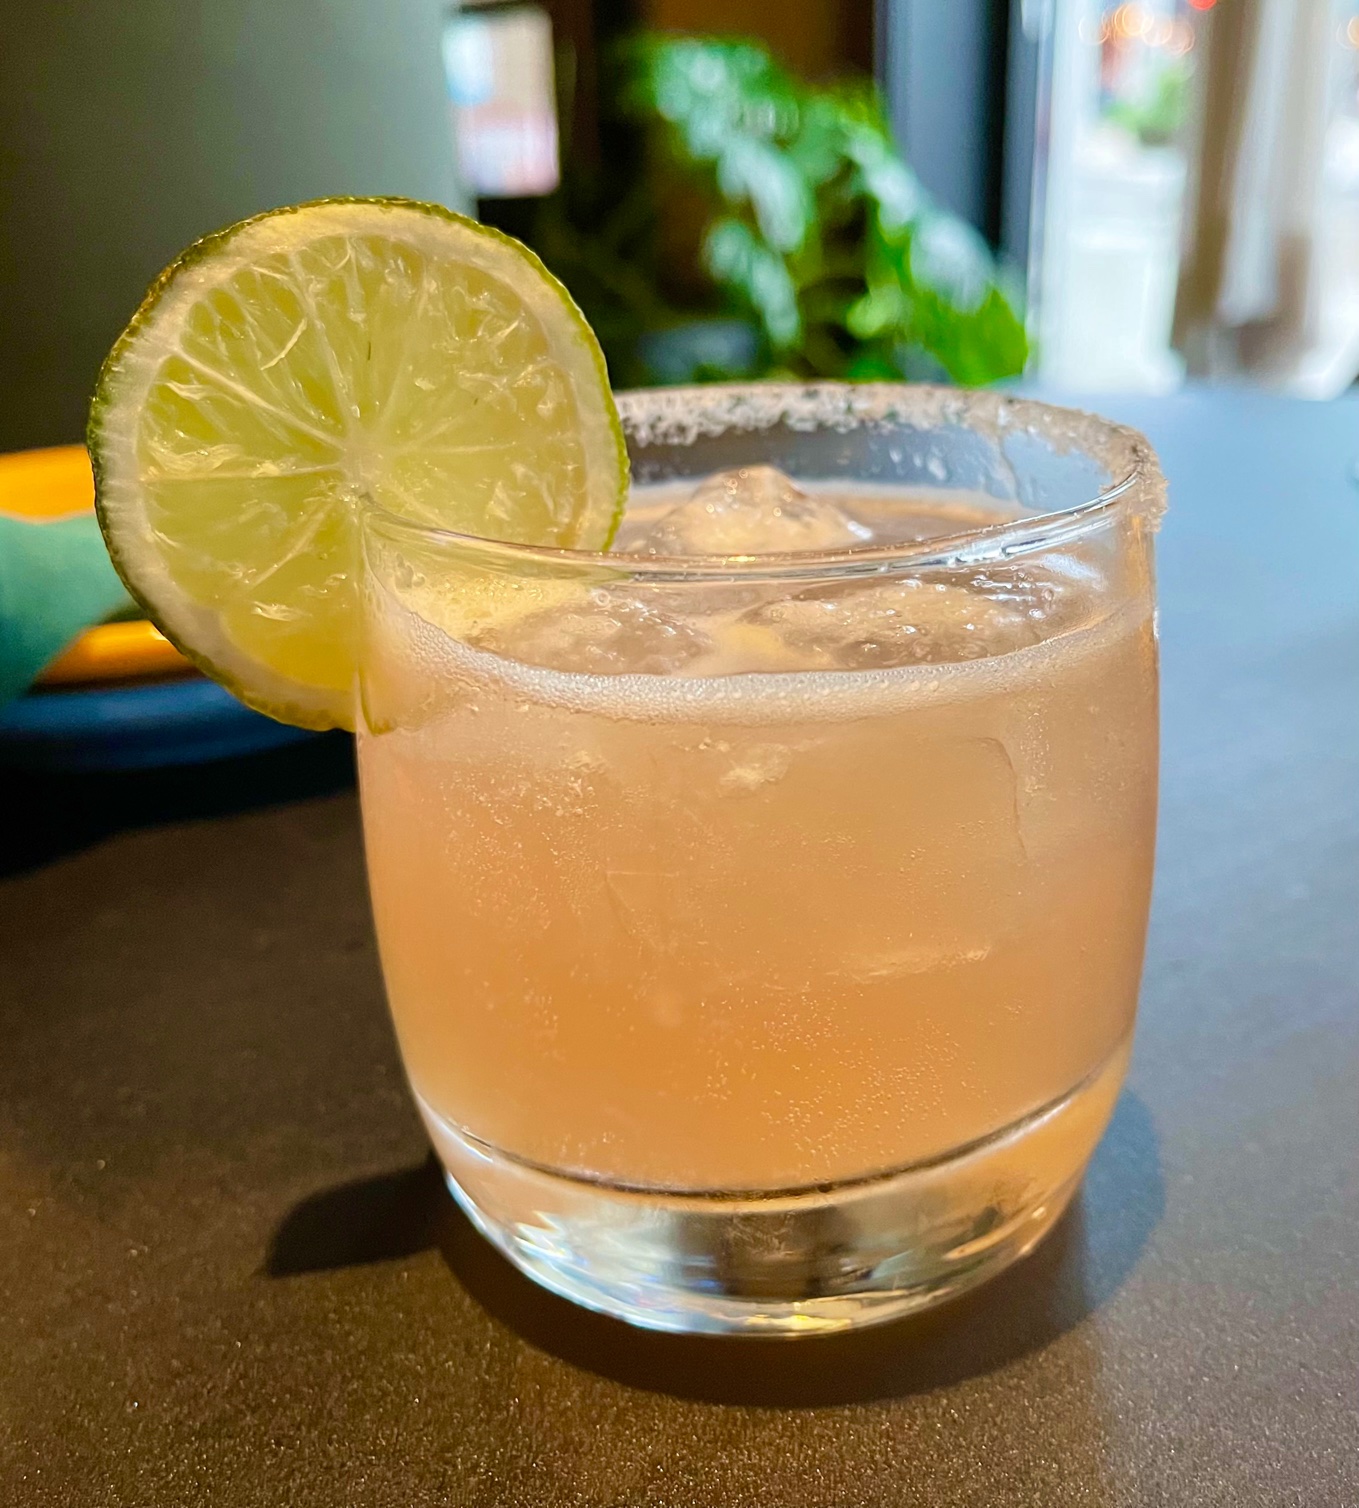 On a gray counter, there is a yellow drink in a half tumbler with a lime garnish. Photo by Stephanie Wheatley.